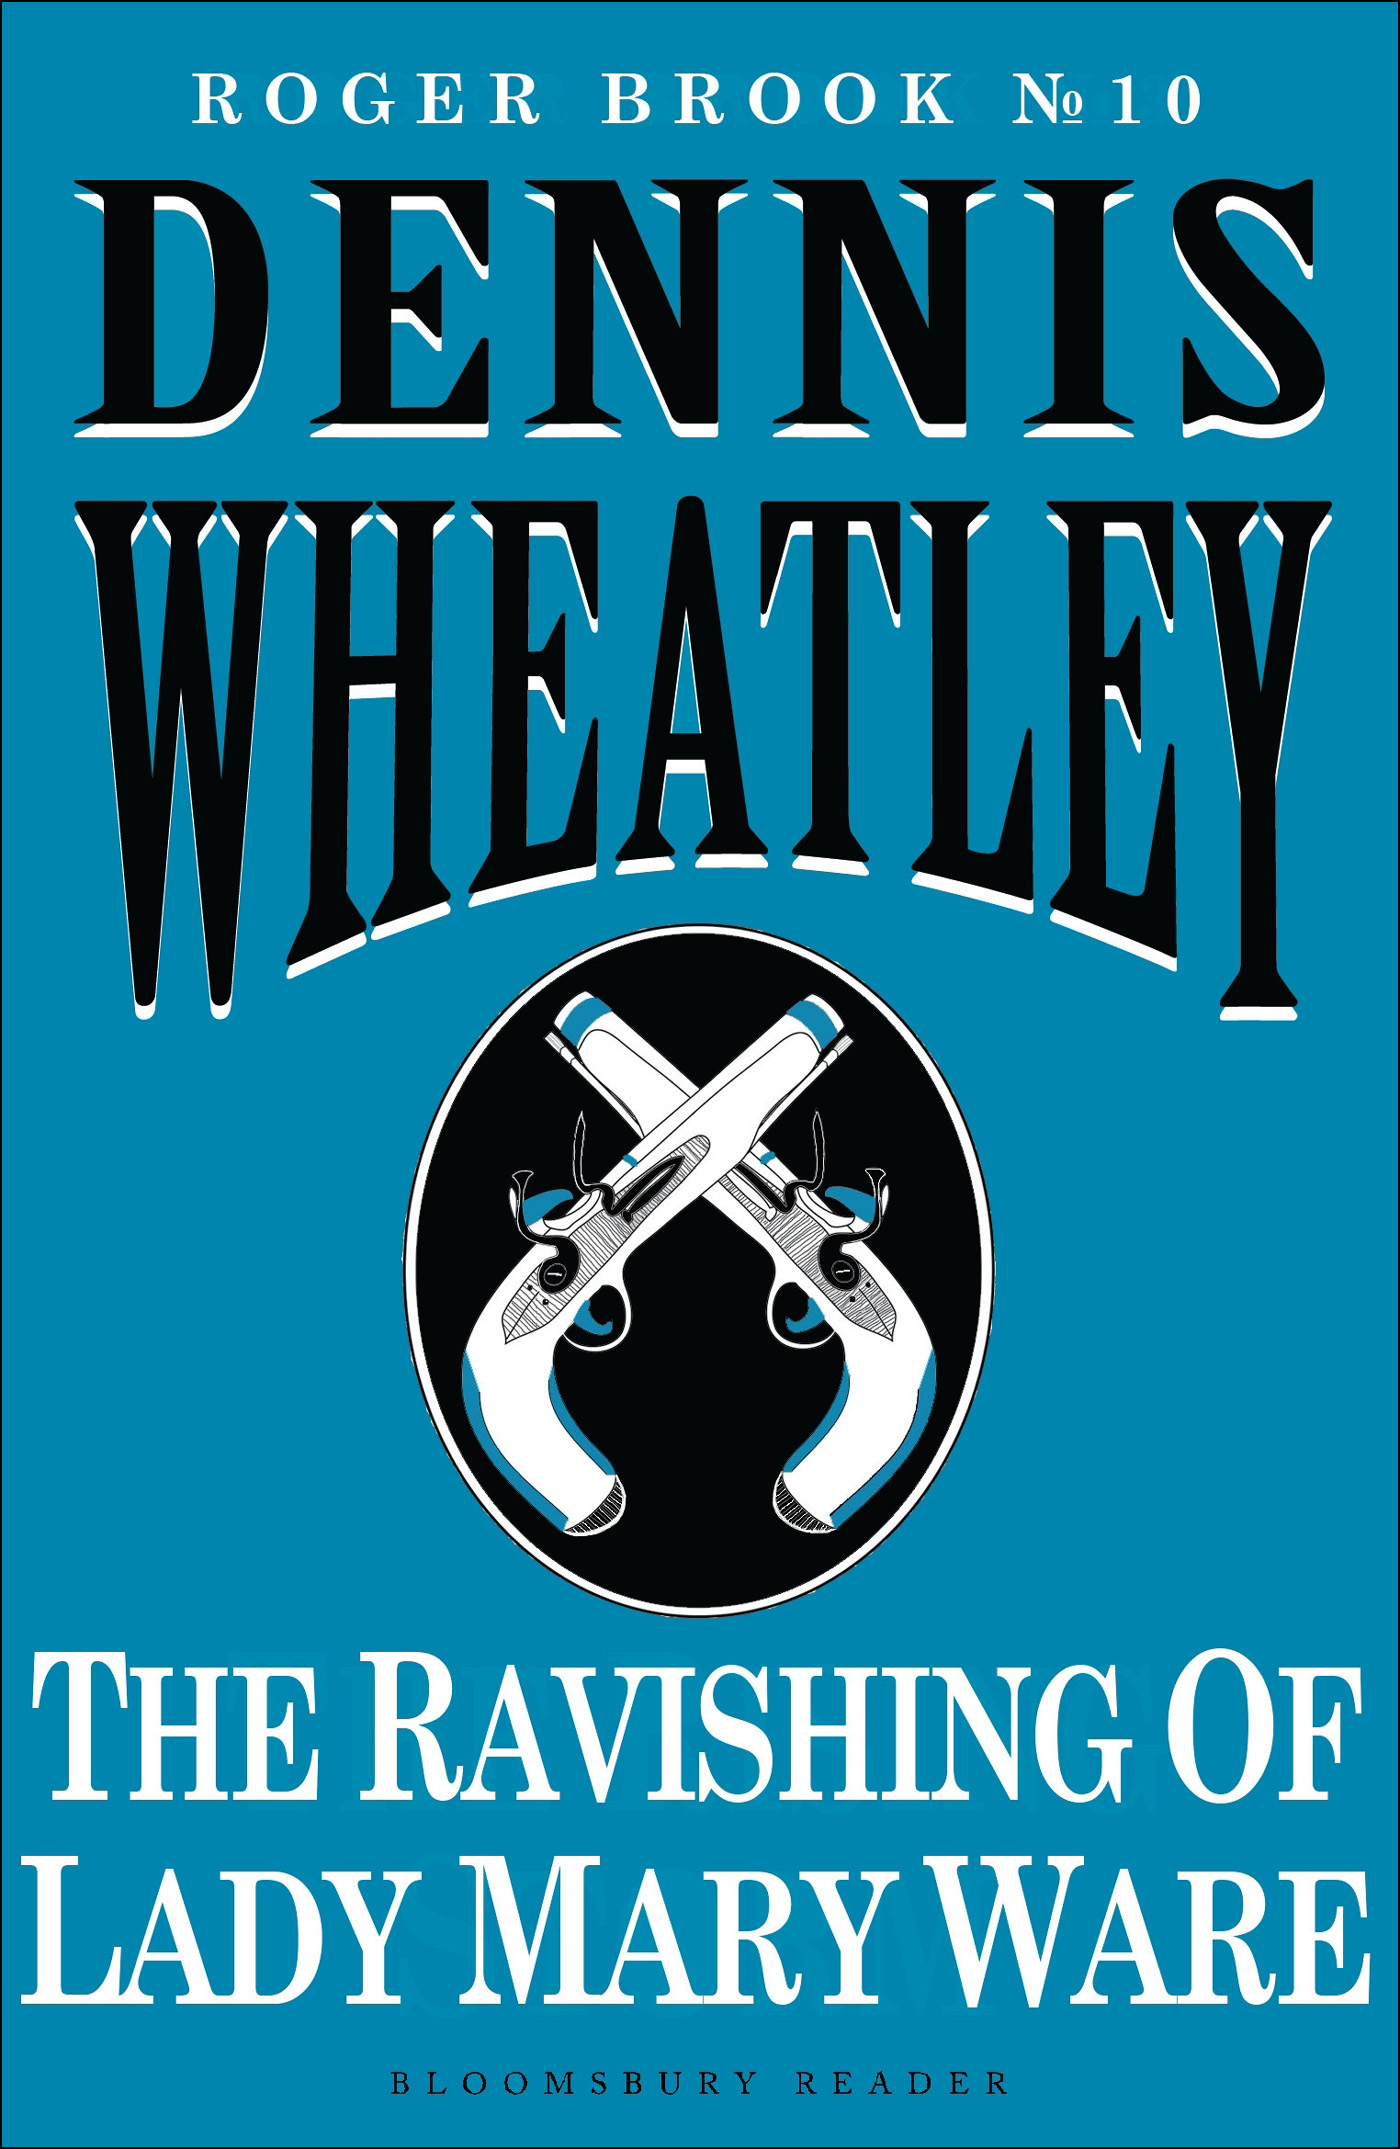 The Ravishing of Lady Mary Ware (1971) by Dennis Wheatley